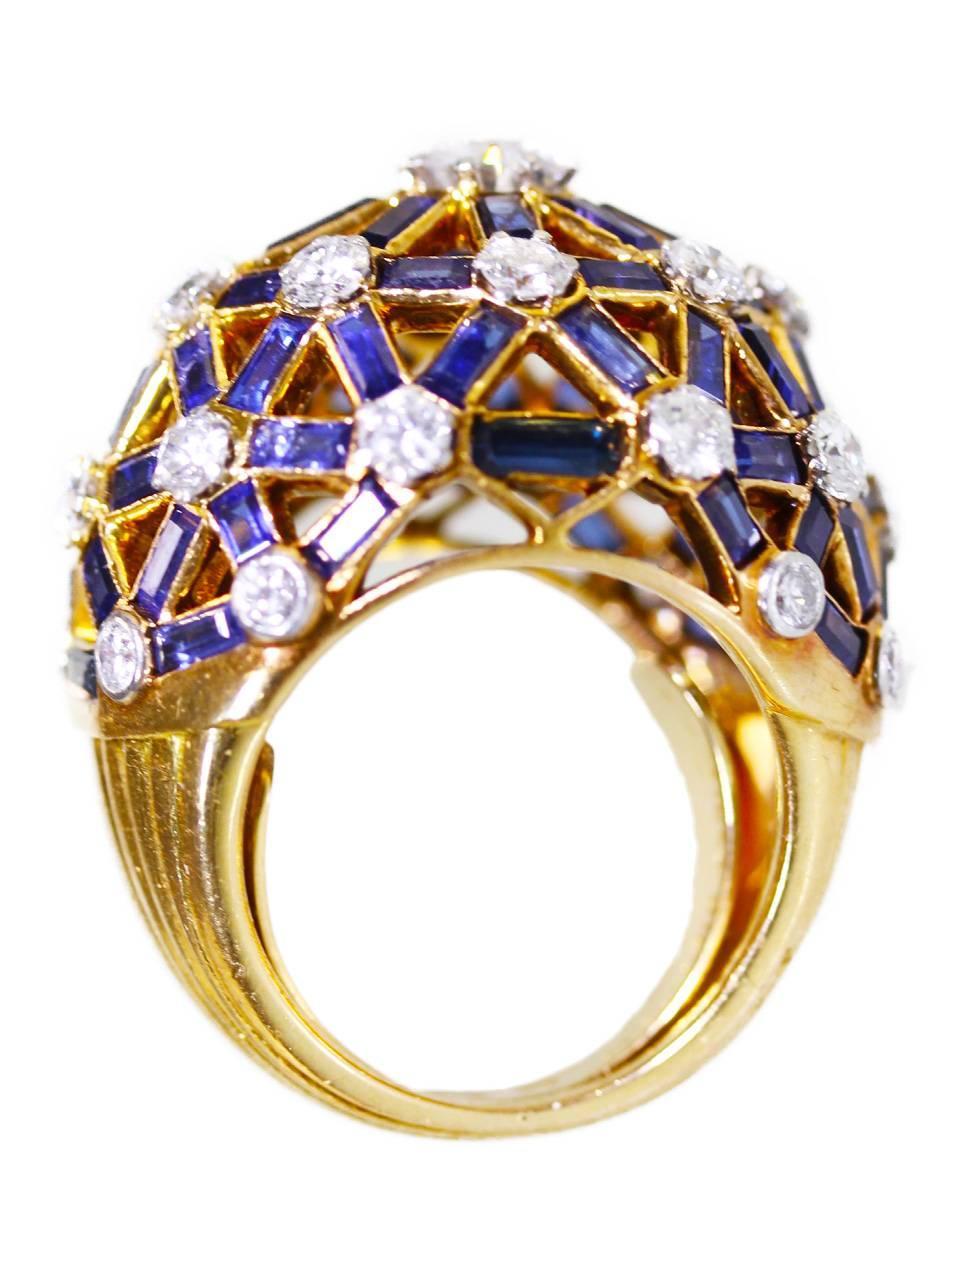 1960s Mellerio Paris Sapphire and Diamond Ring For Sale at 1stdibs